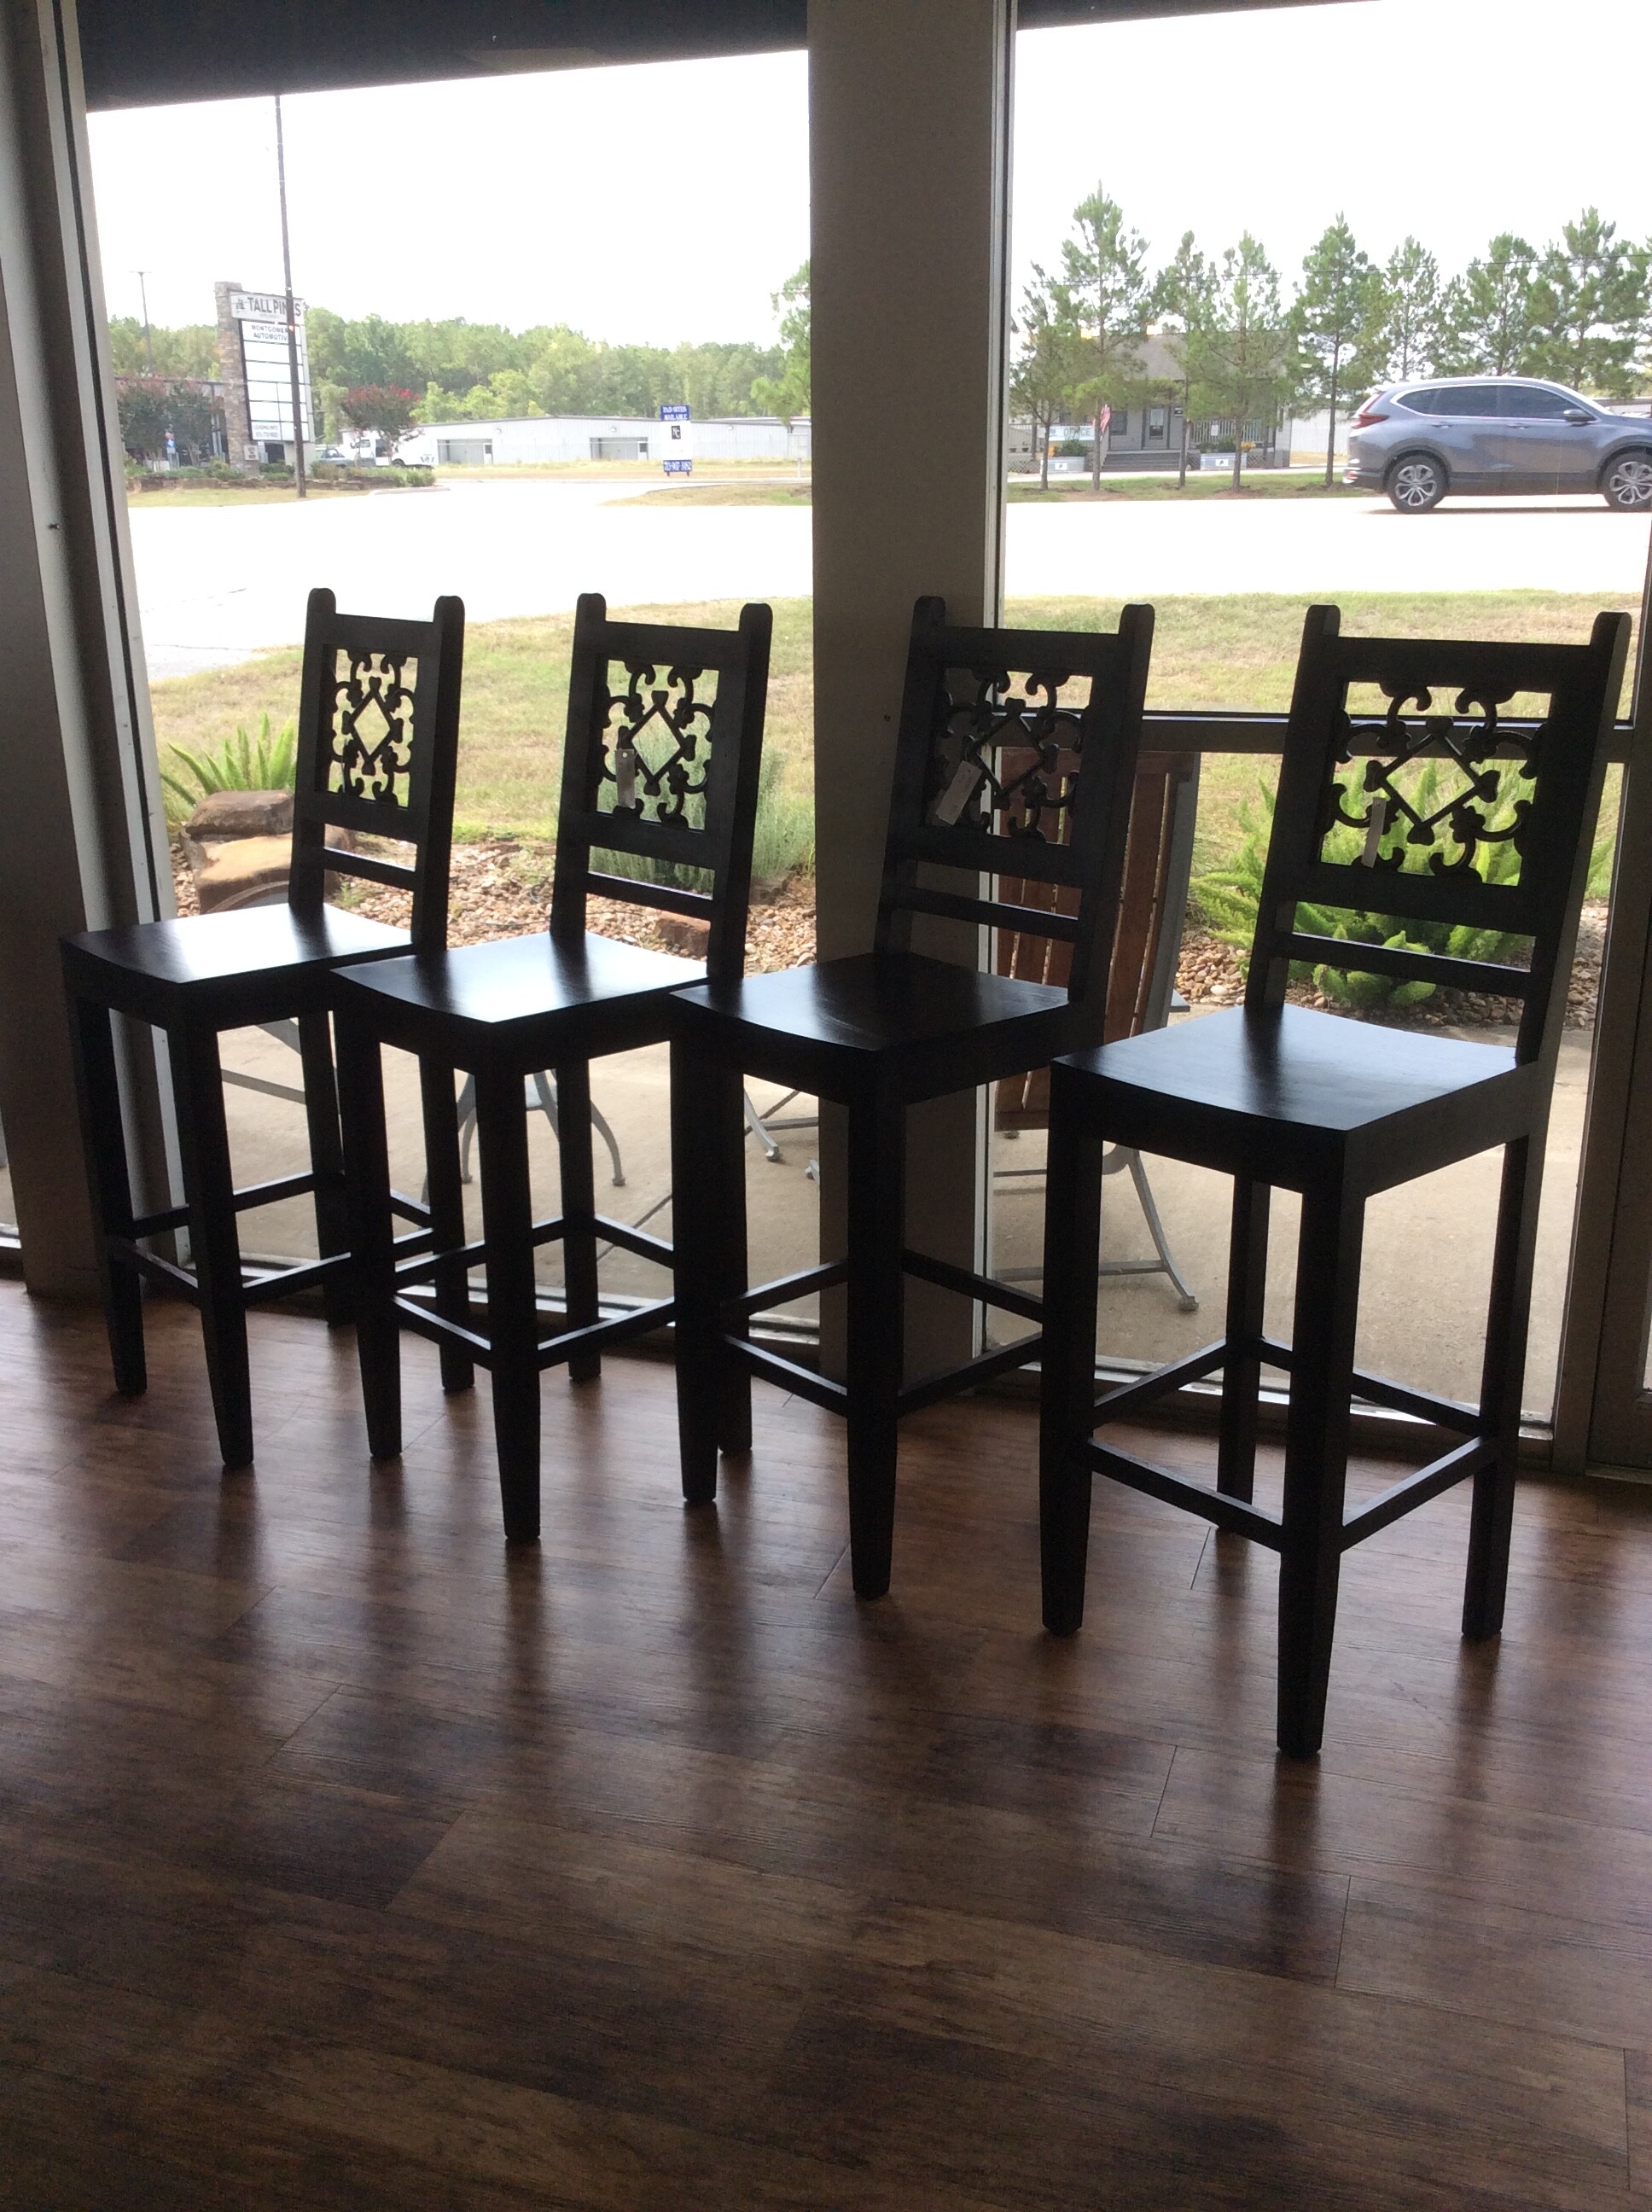 This is a set of 4 black bar stools with a swirle design on the back.